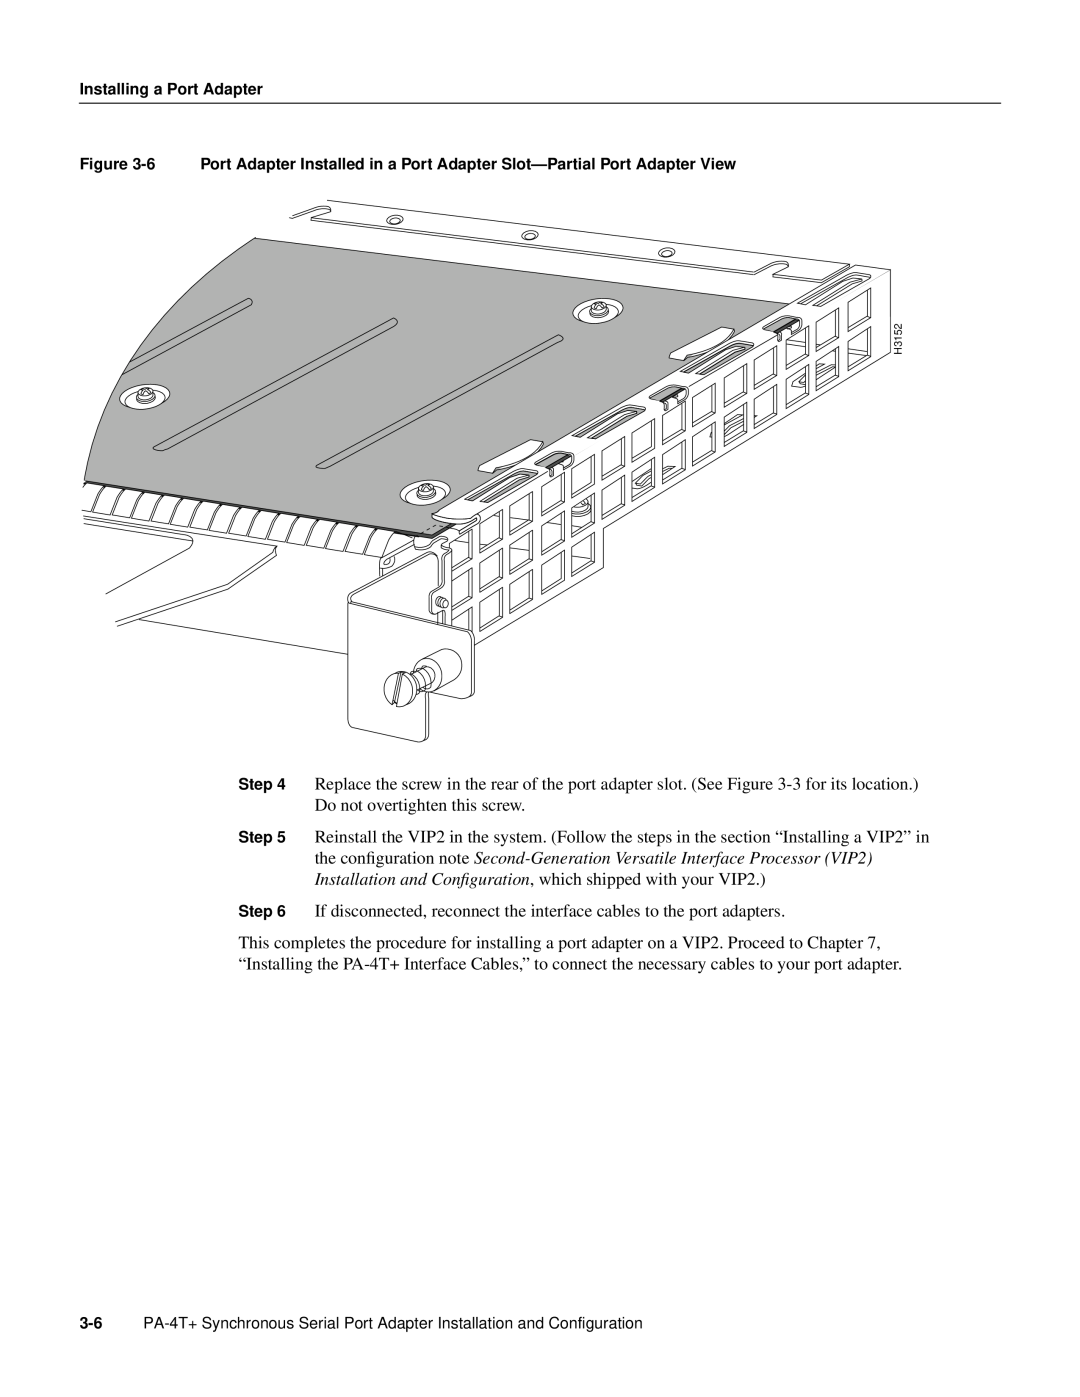 Cisco Systems PA-4T manual H3152 